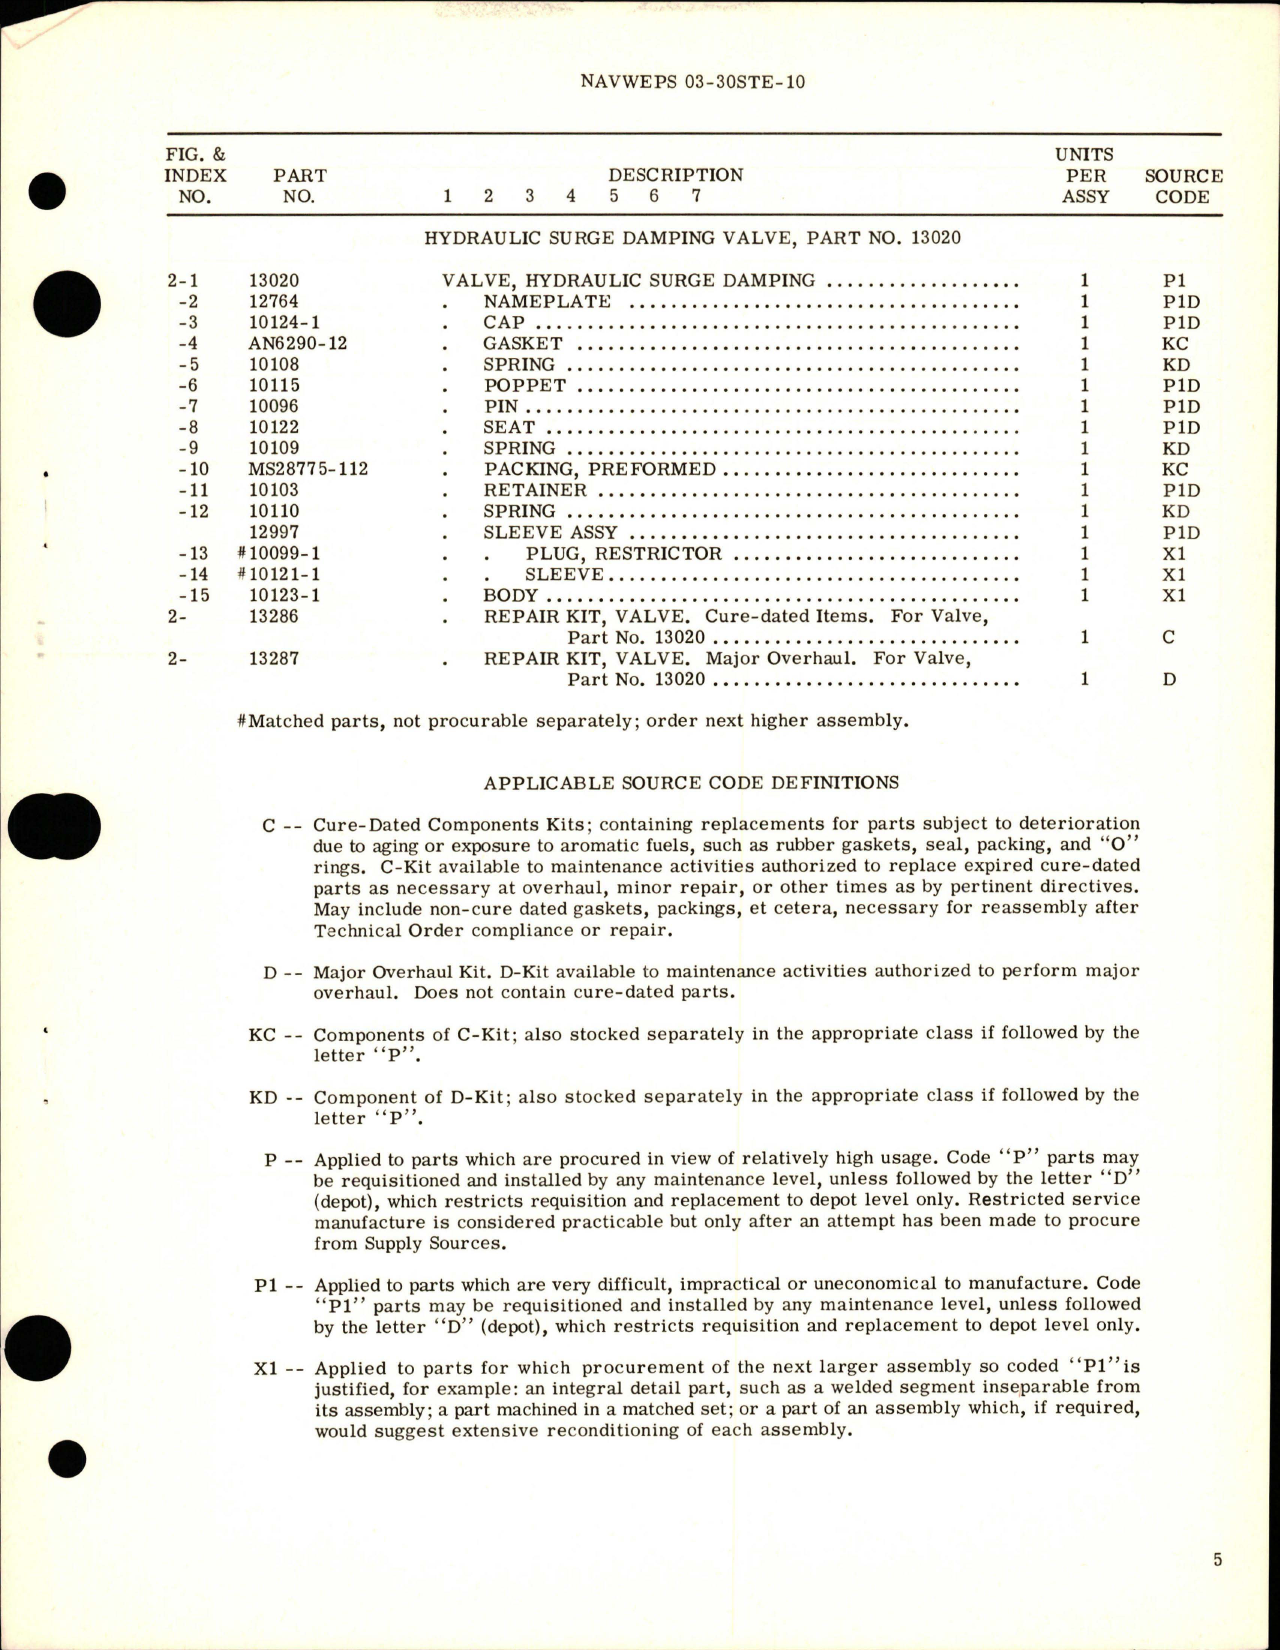 Sample page 5 from AirCorps Library document: Overhaul Instructions with Parts Breakdown for Hydraulic Surge Damping Valve - Part 13020 